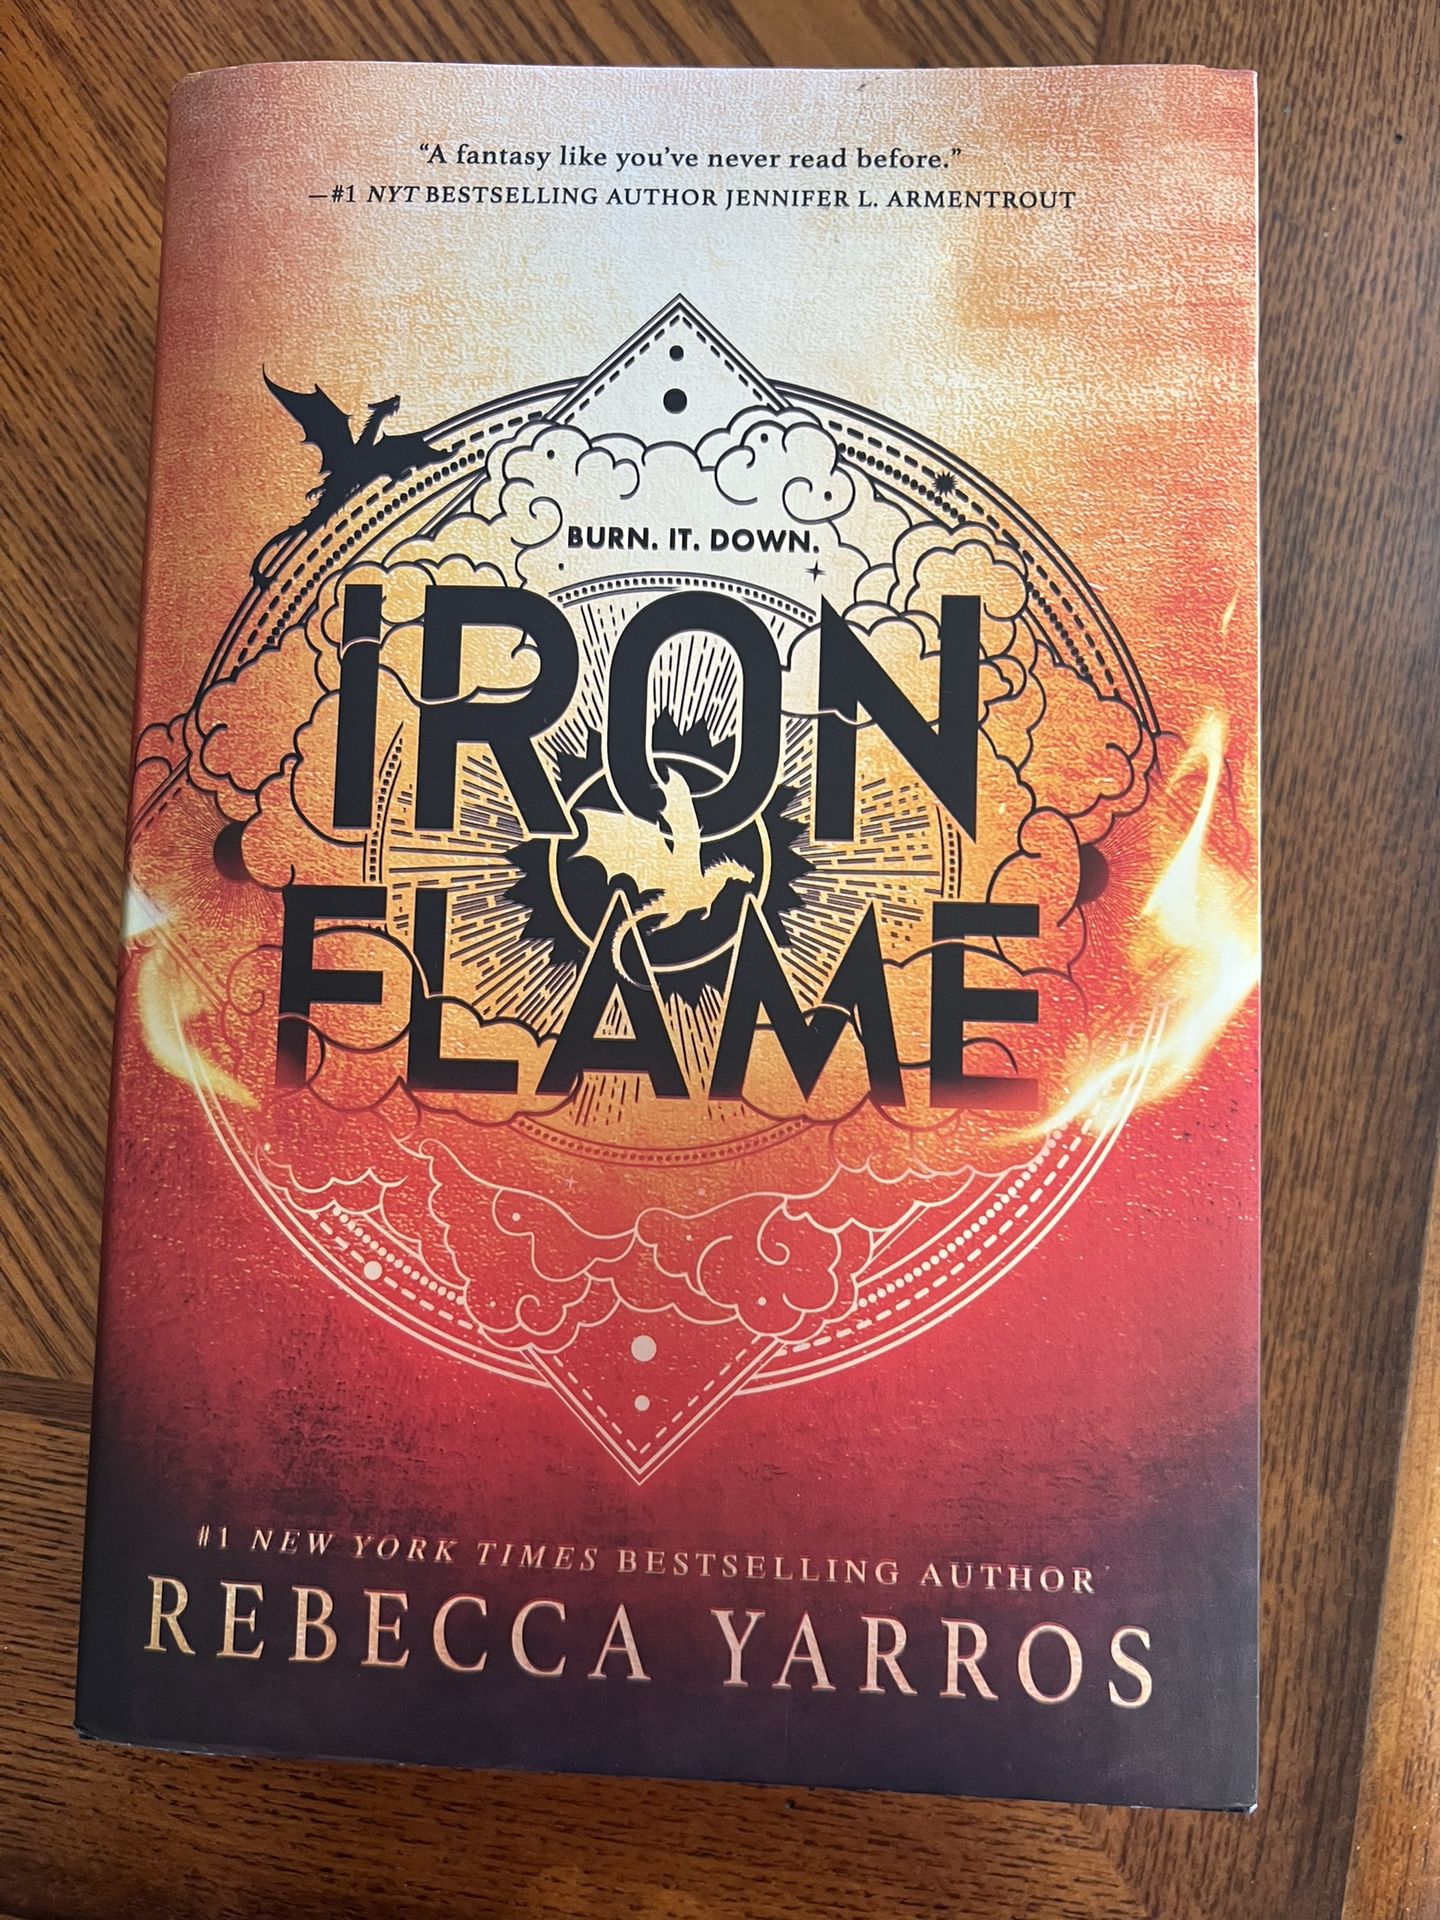 Iron Flame by Rebecca Yarros